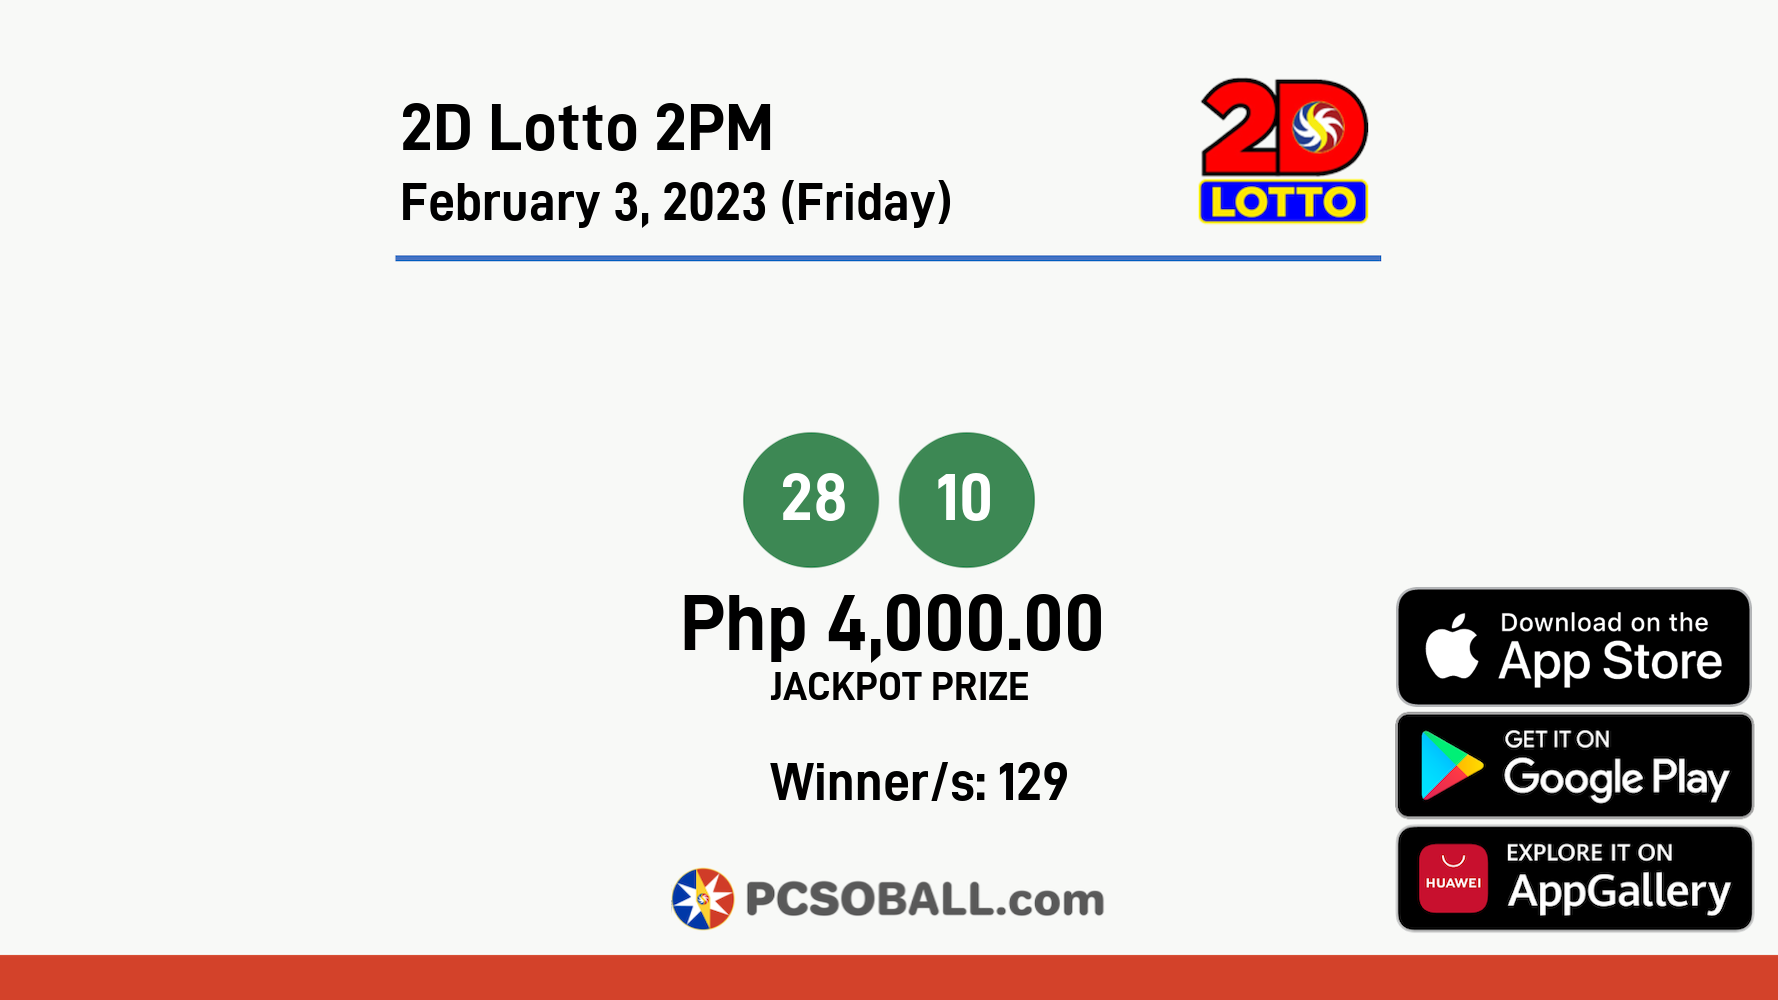 2D Lotto 2PM February 3, 2023 (Friday) Result